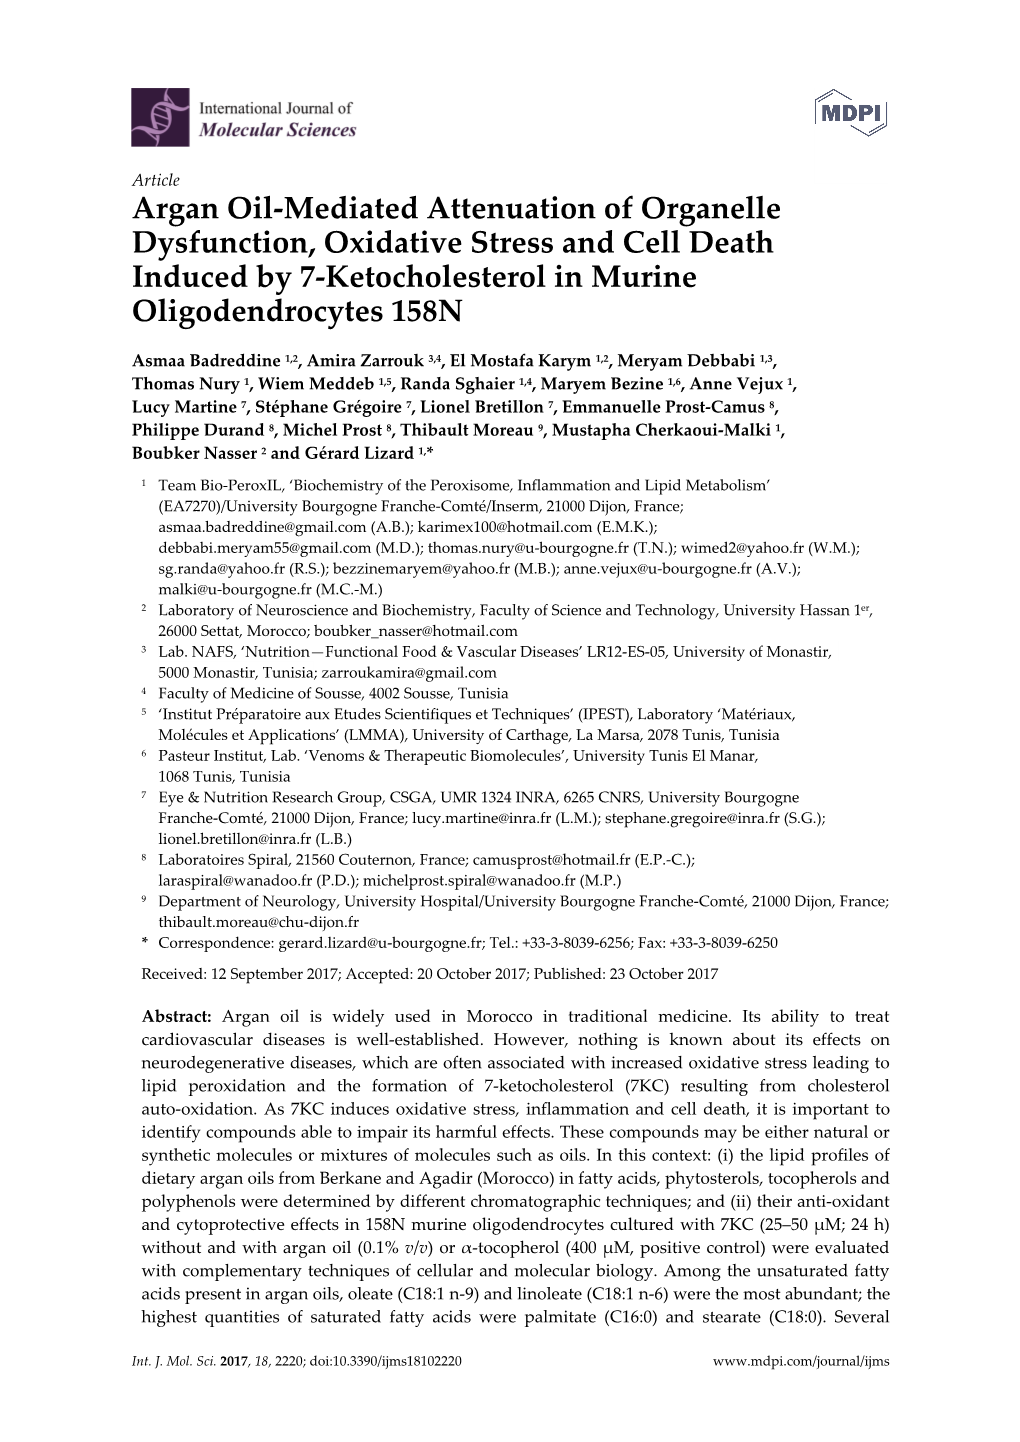 Argan Oil-Mediated Attenuation of Organelle Dysfunction, Oxidative Stress and Cell Death Induced by 7-Ketocholesterol in Murine Oligodendrocytes 158N